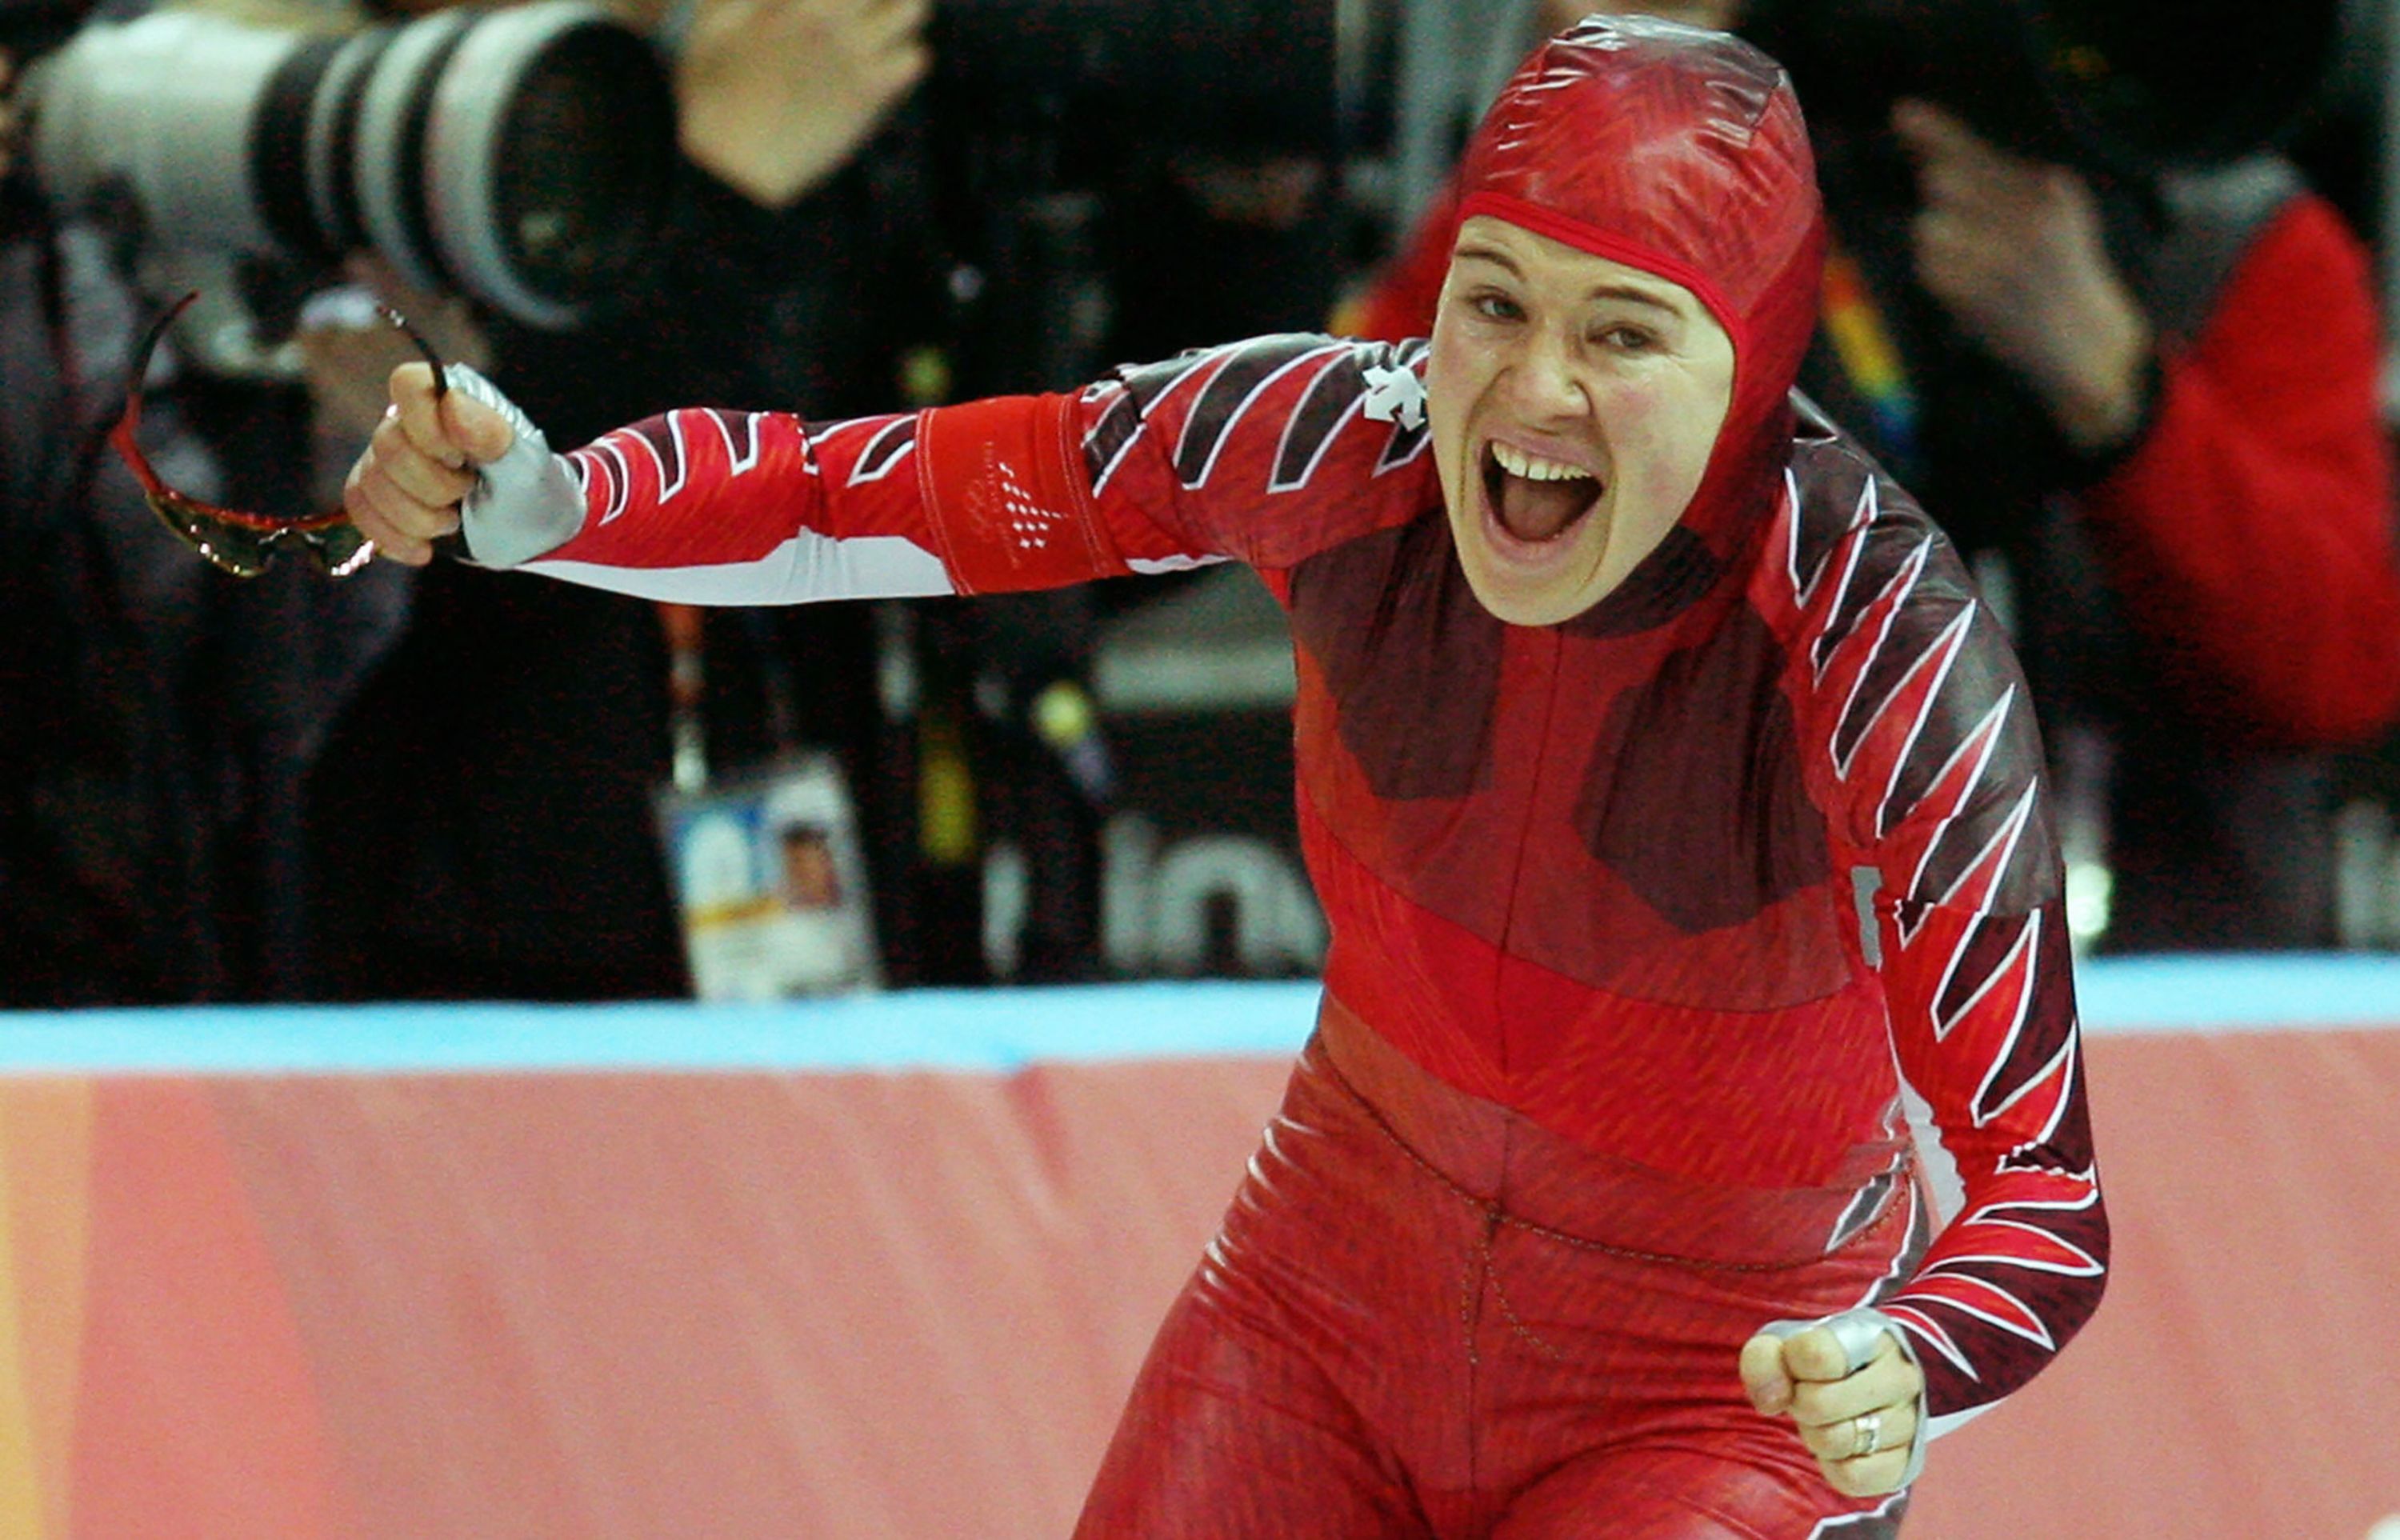 Canadian Clara Hughes is the only person in history to win multiple Olympic medals in both summer and winter sports. She won a couple of bronze medals in cycling before collecting four speedskating medals over three Winter Olympics.